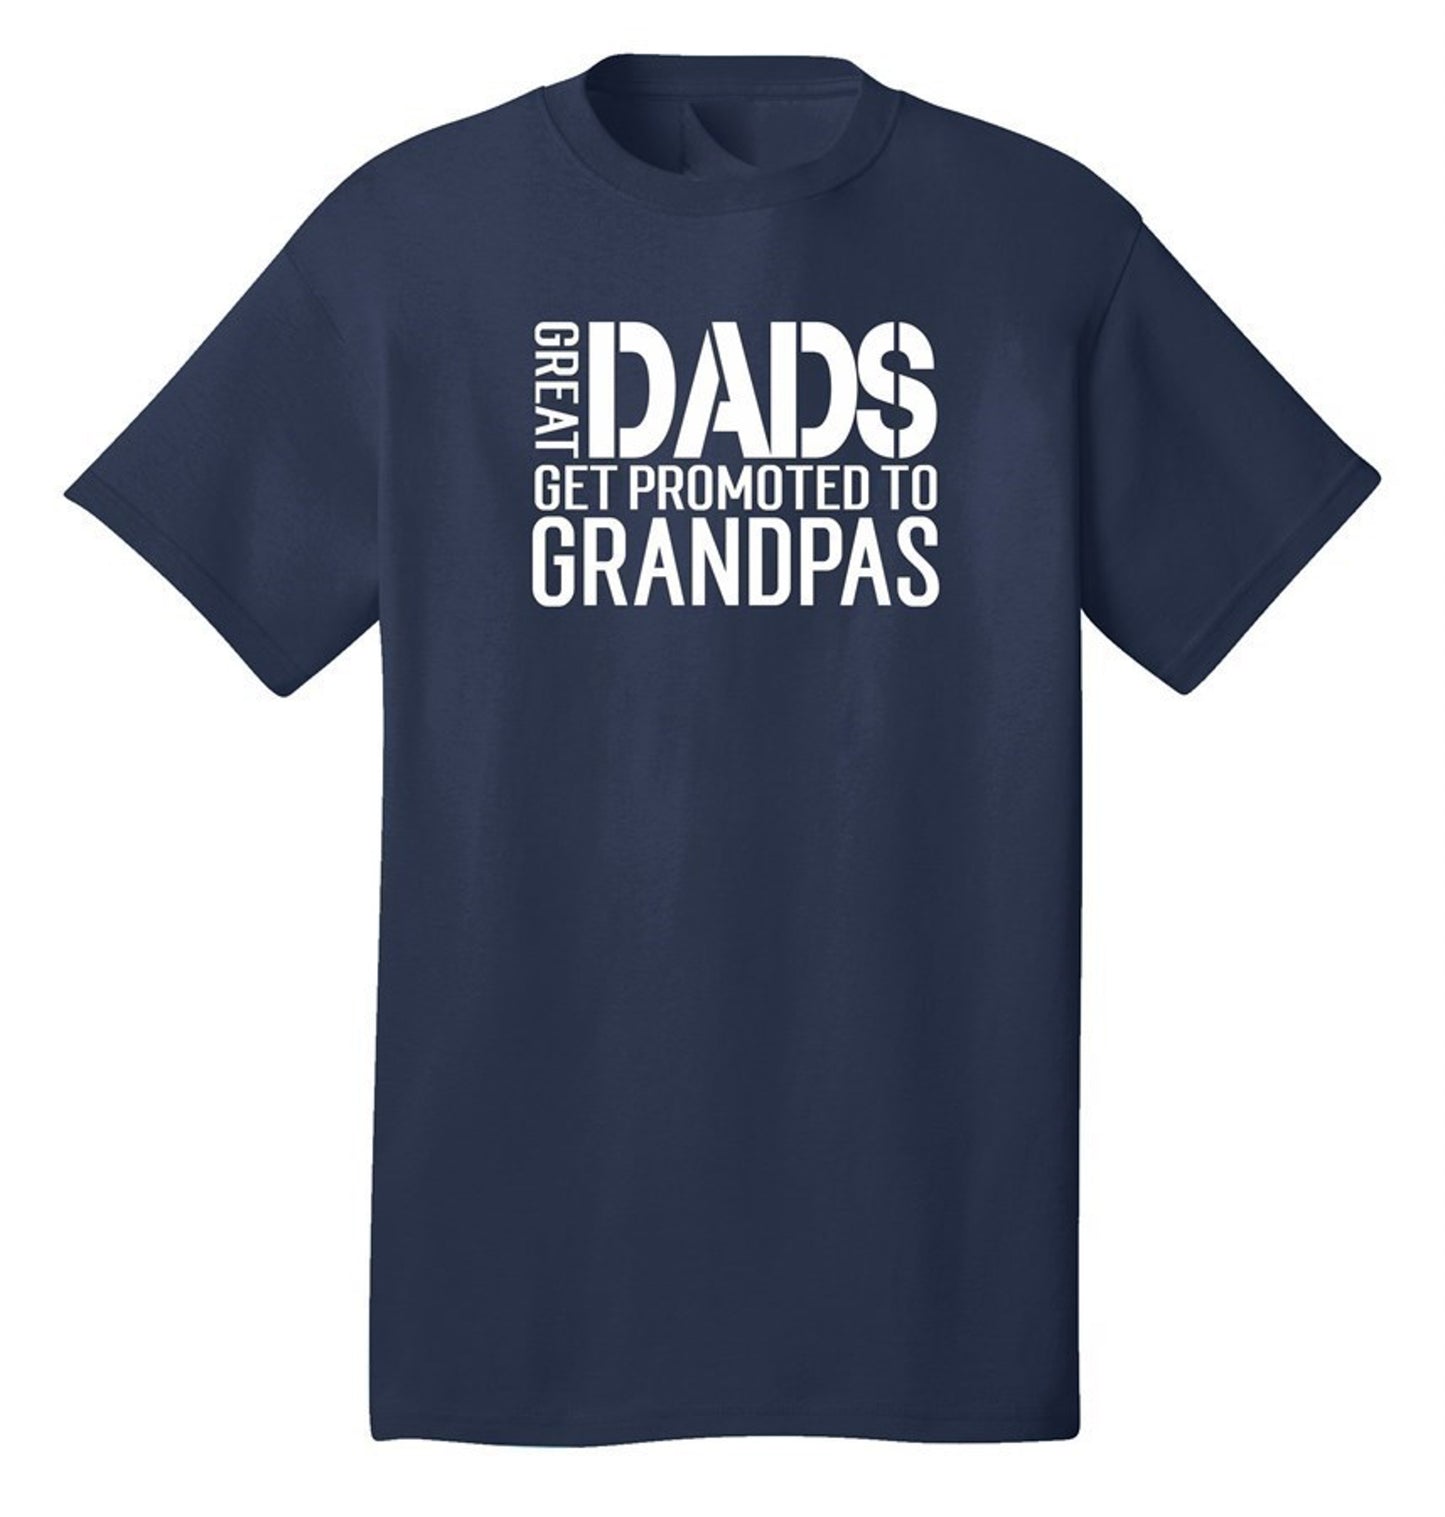 Great Dads Get Promoted To Grandpas T-Shirt or Crew Sweatshirt